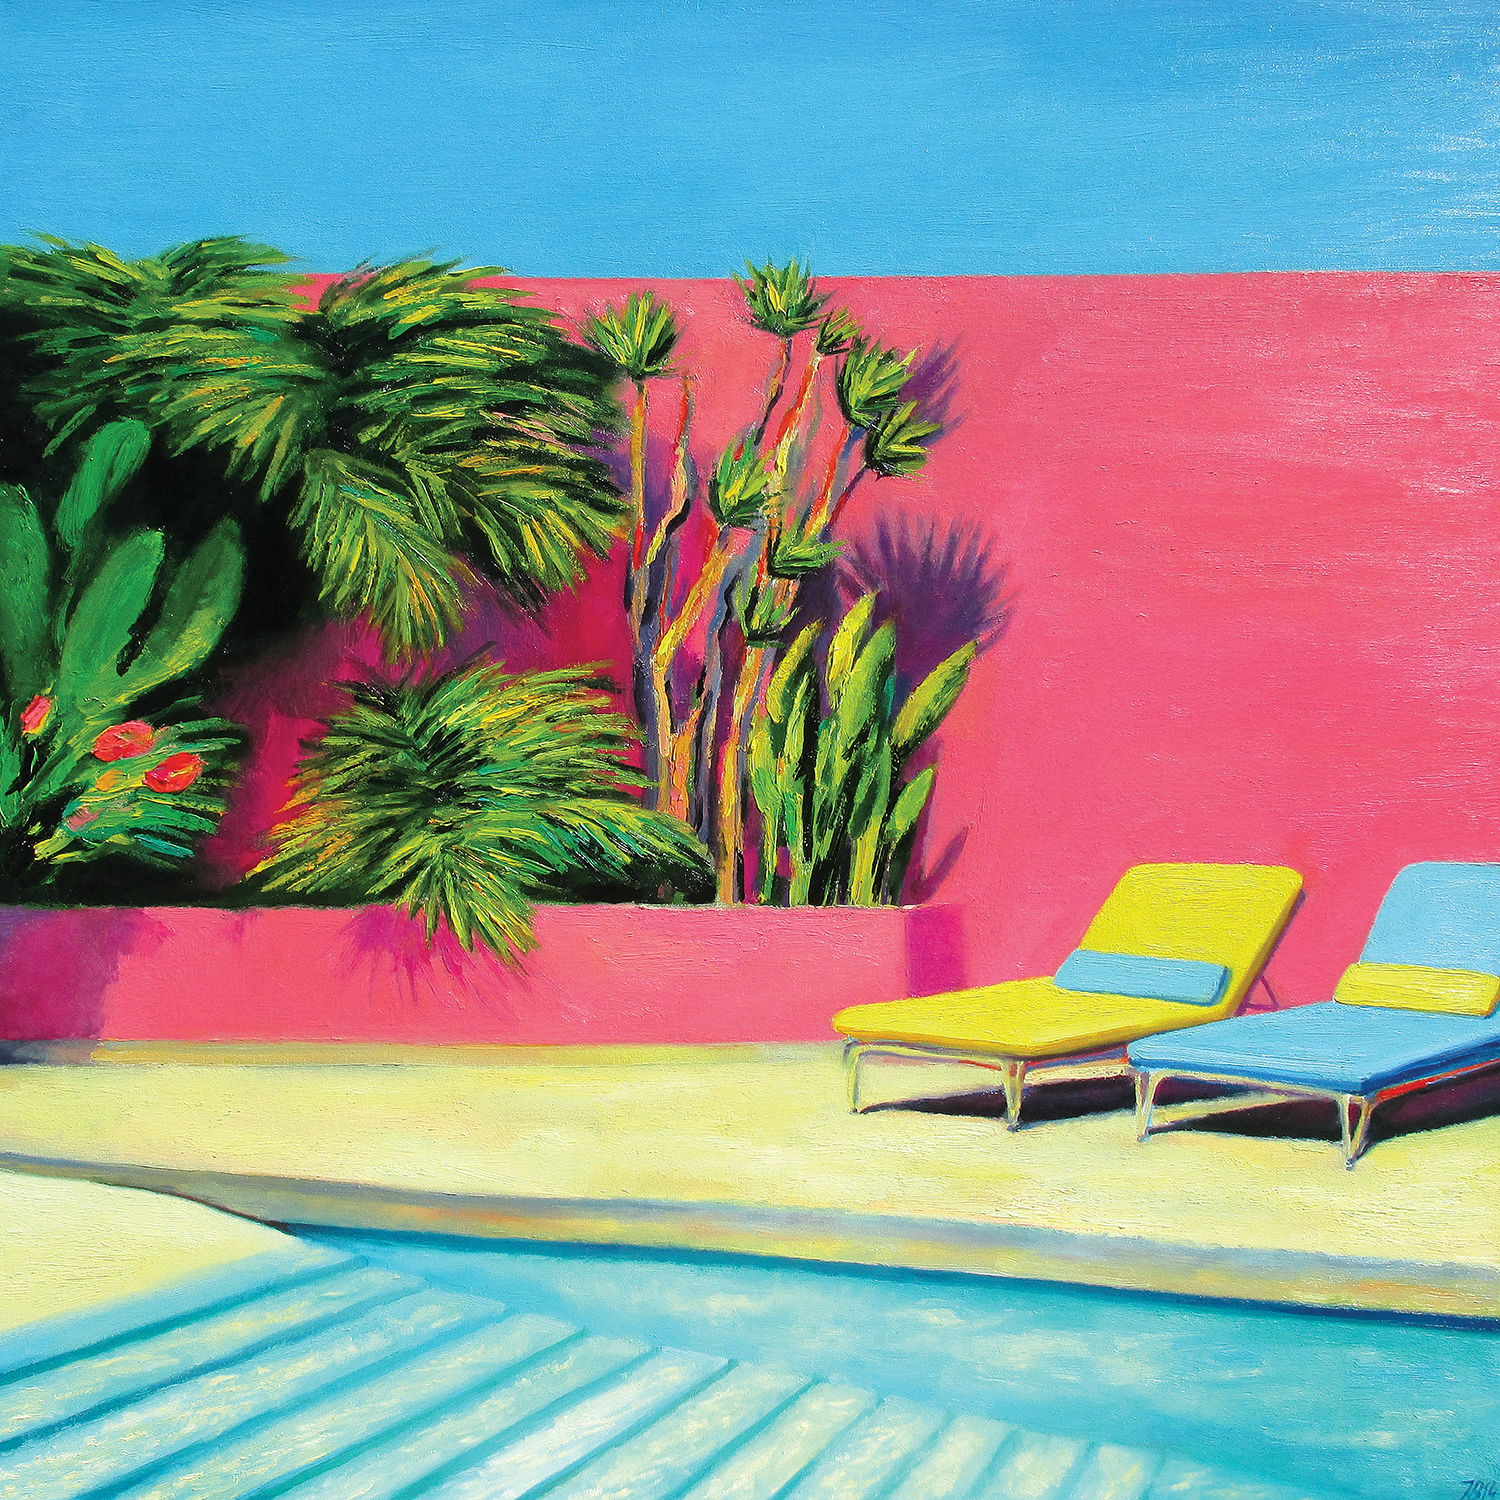 two lounge chairs against pink wall with green plant life and stairs into the pool